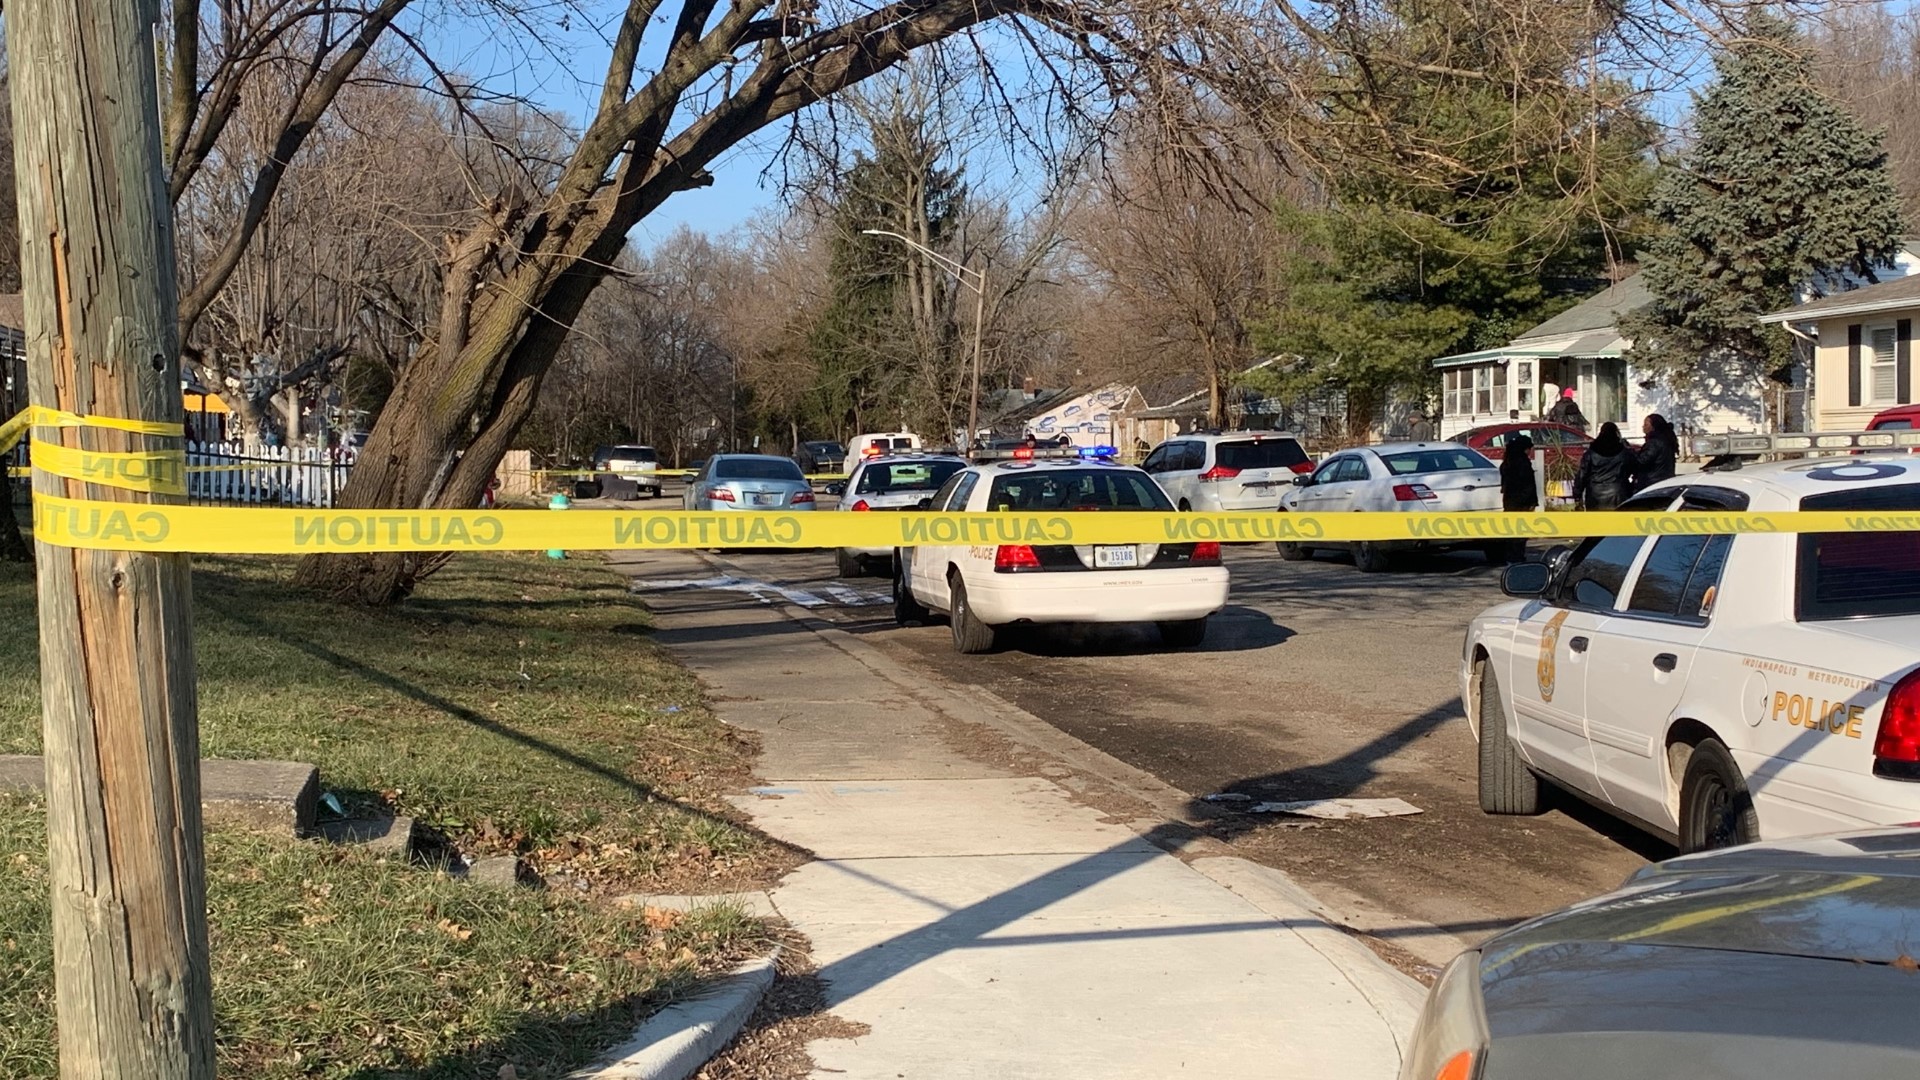 Investigators spent hours connecting the dots between three crime scenes after a man was killed in a shooting and two others who had been shot were found nearby.